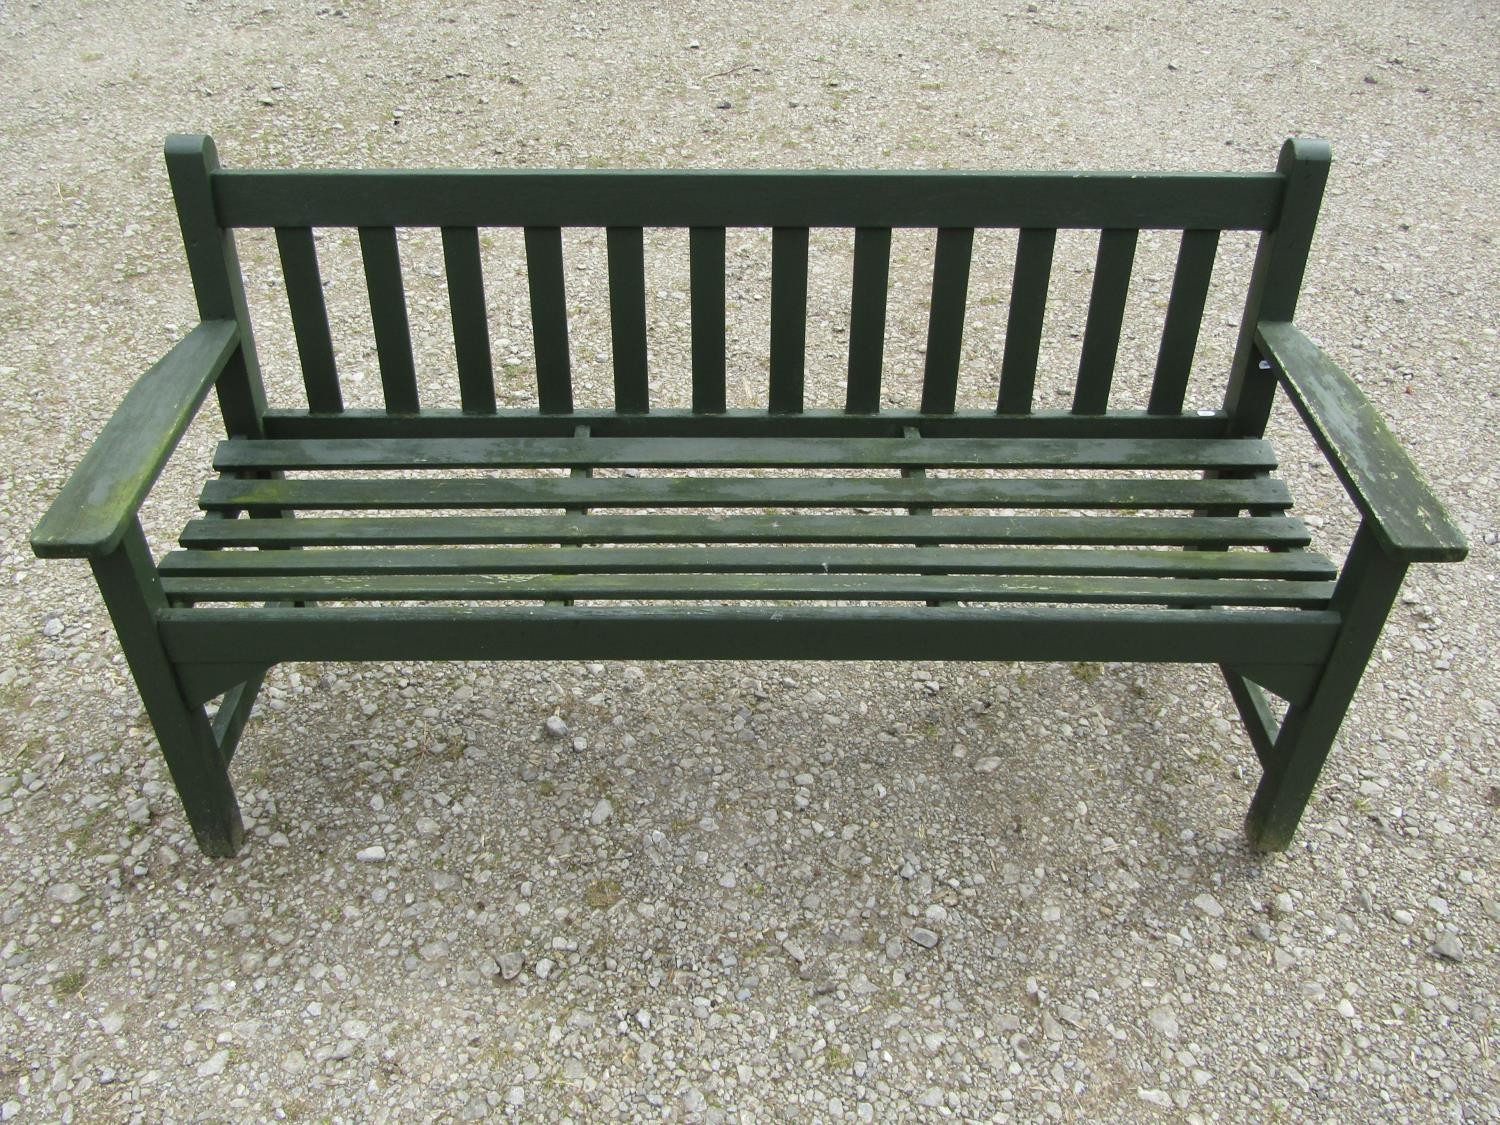 A vintage green painted teak three seat garden bench with slatted seat and back (probably a Lister